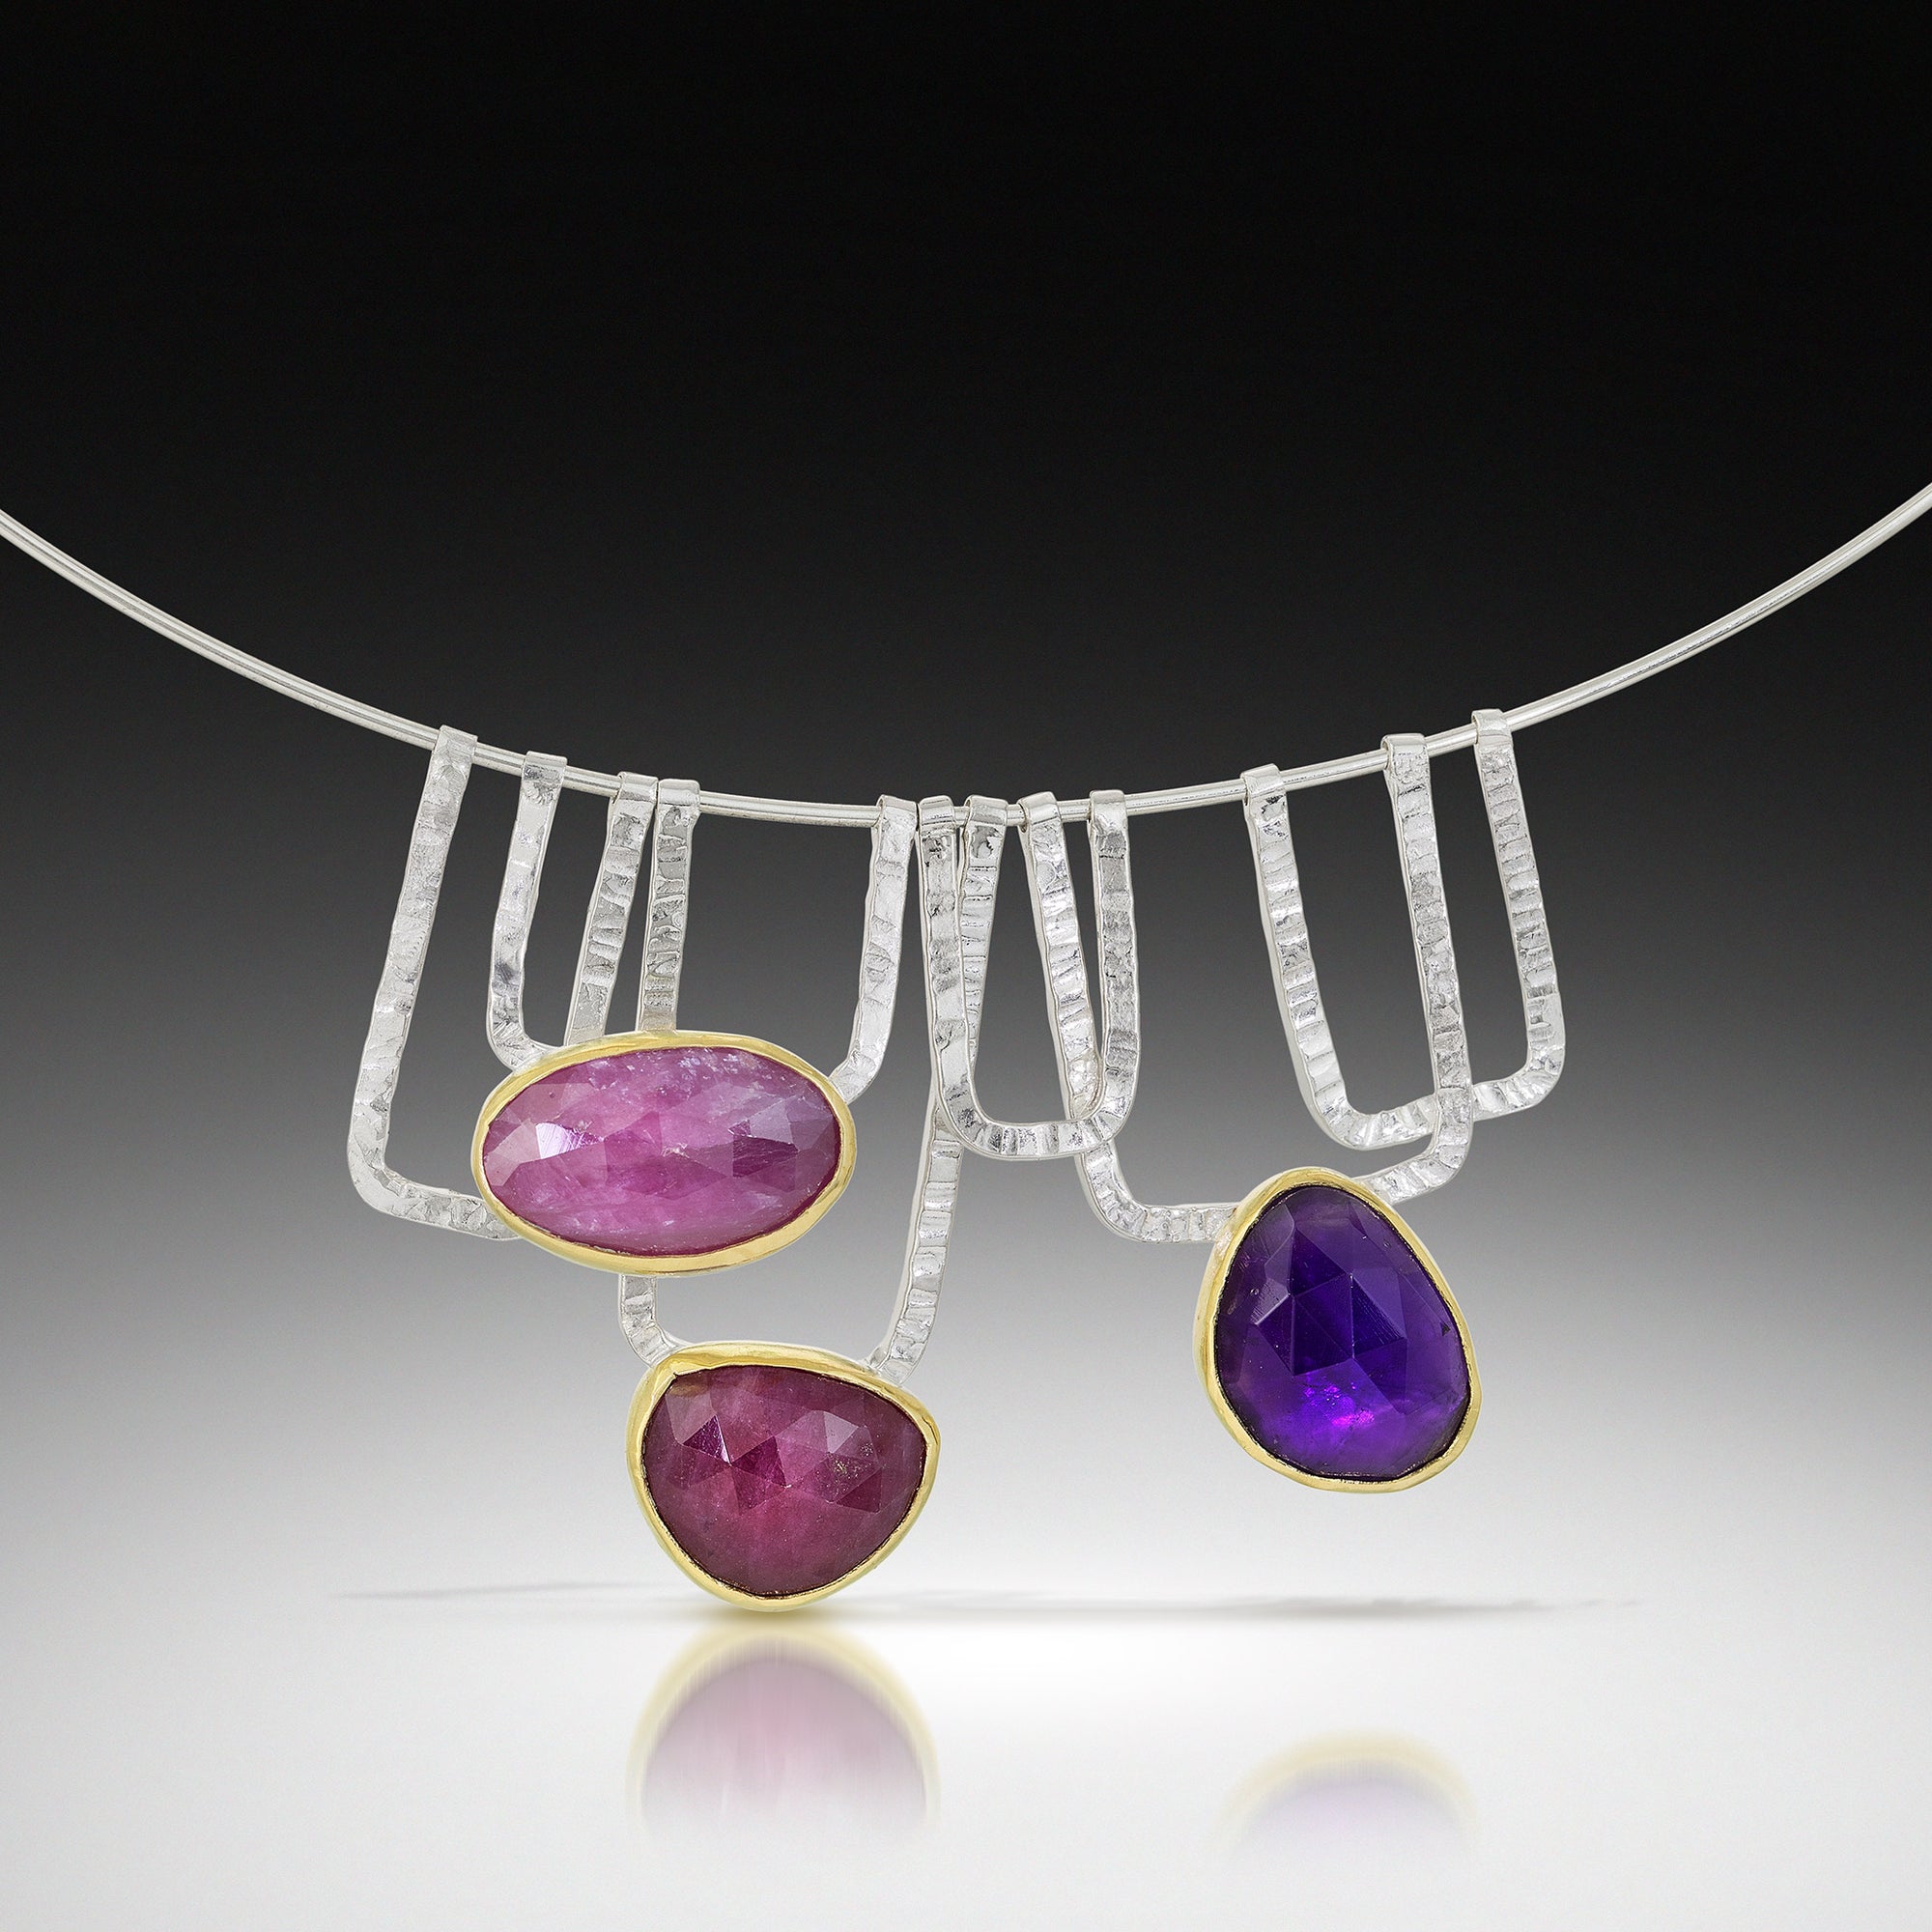 Cirque Trapeze Necklace in Purples - Sterling and 18k gold w/ Pink Sapphire, Ruby, Amethyst